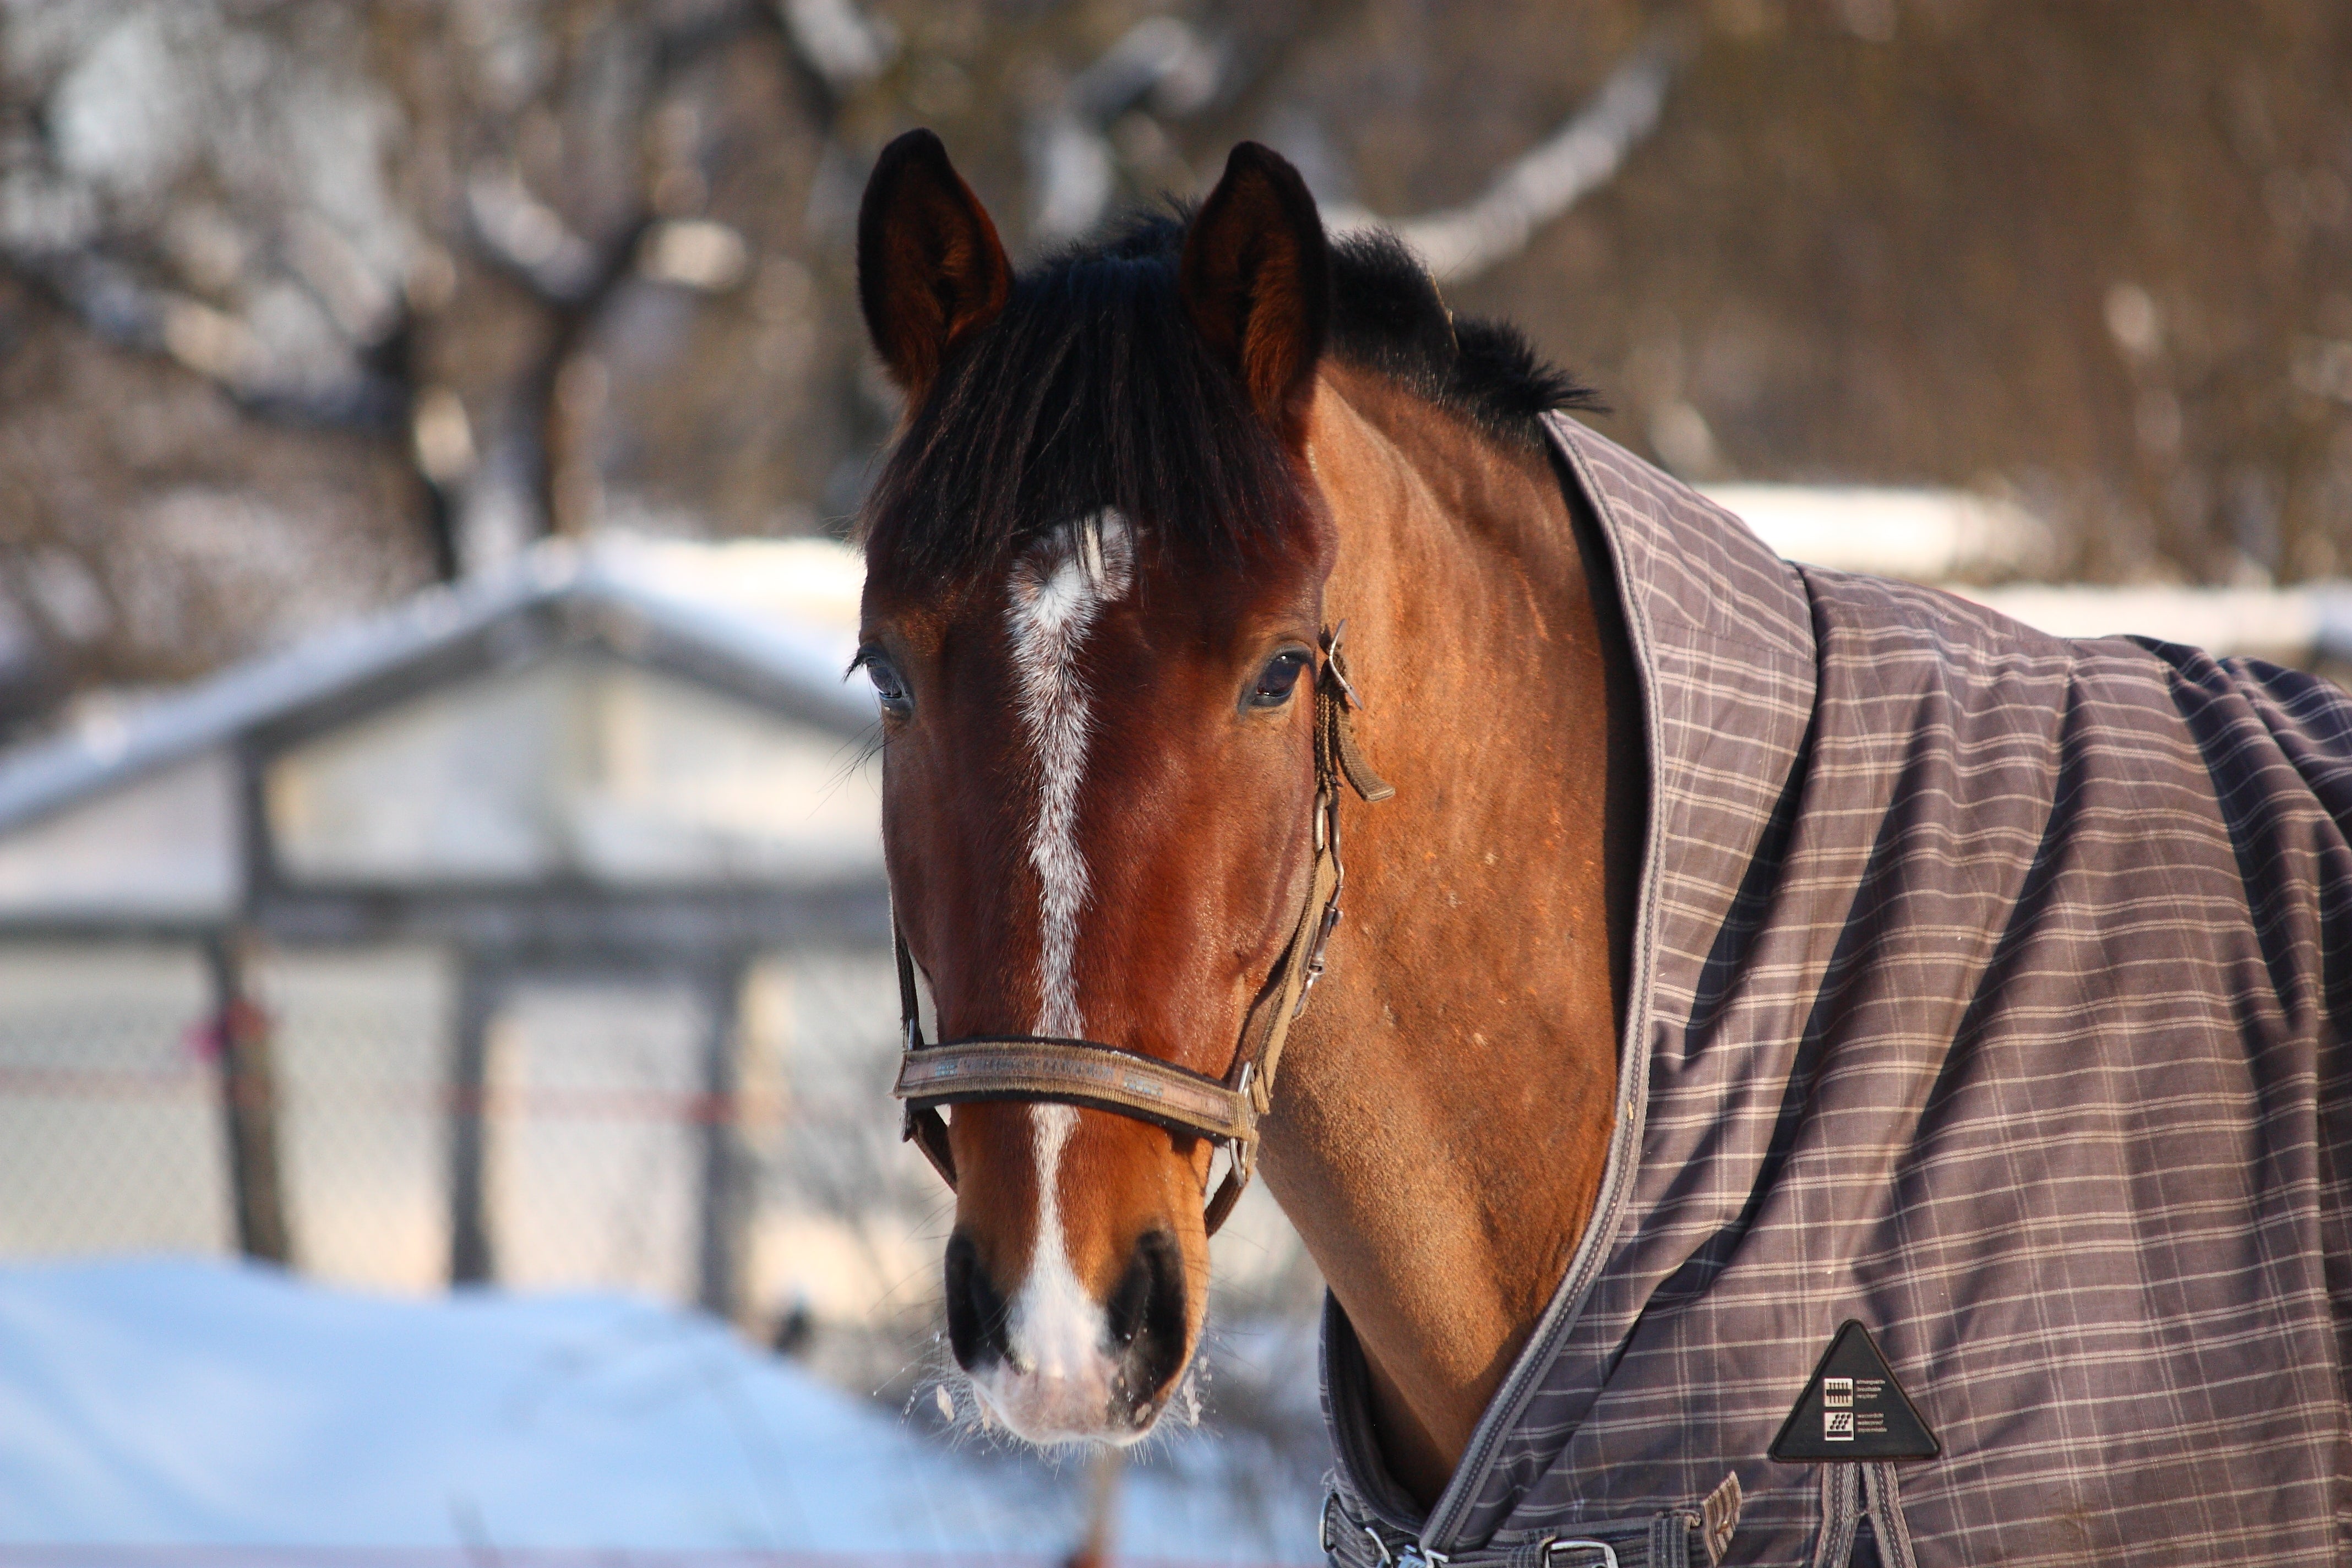 Feeding your horse during the winter months